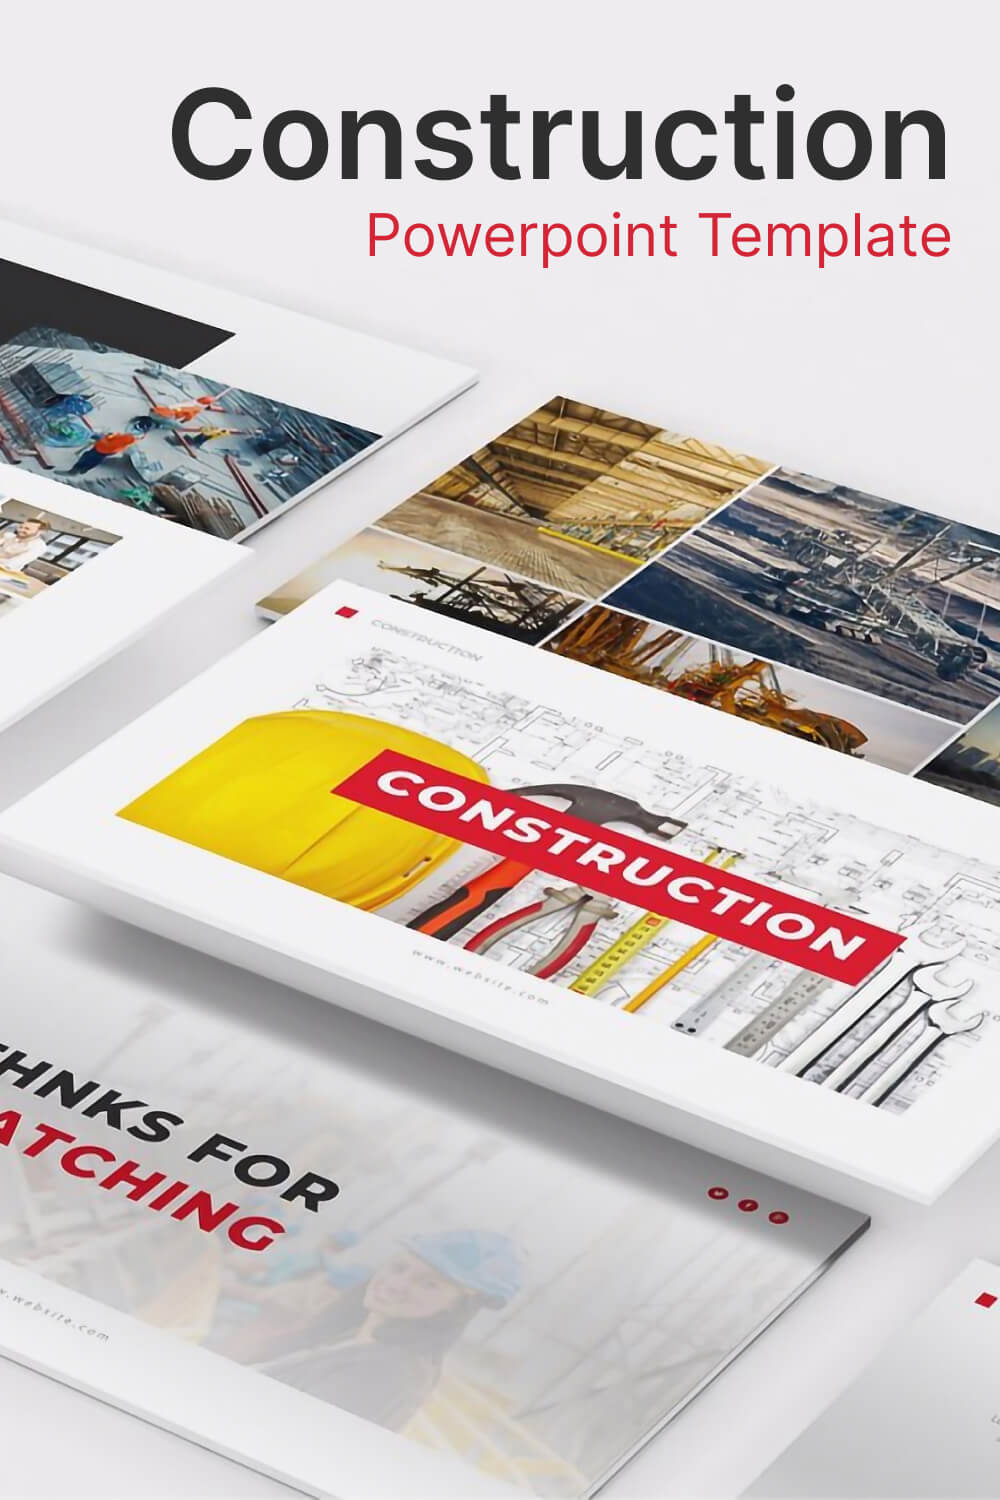 Construction Powerpoint Template.